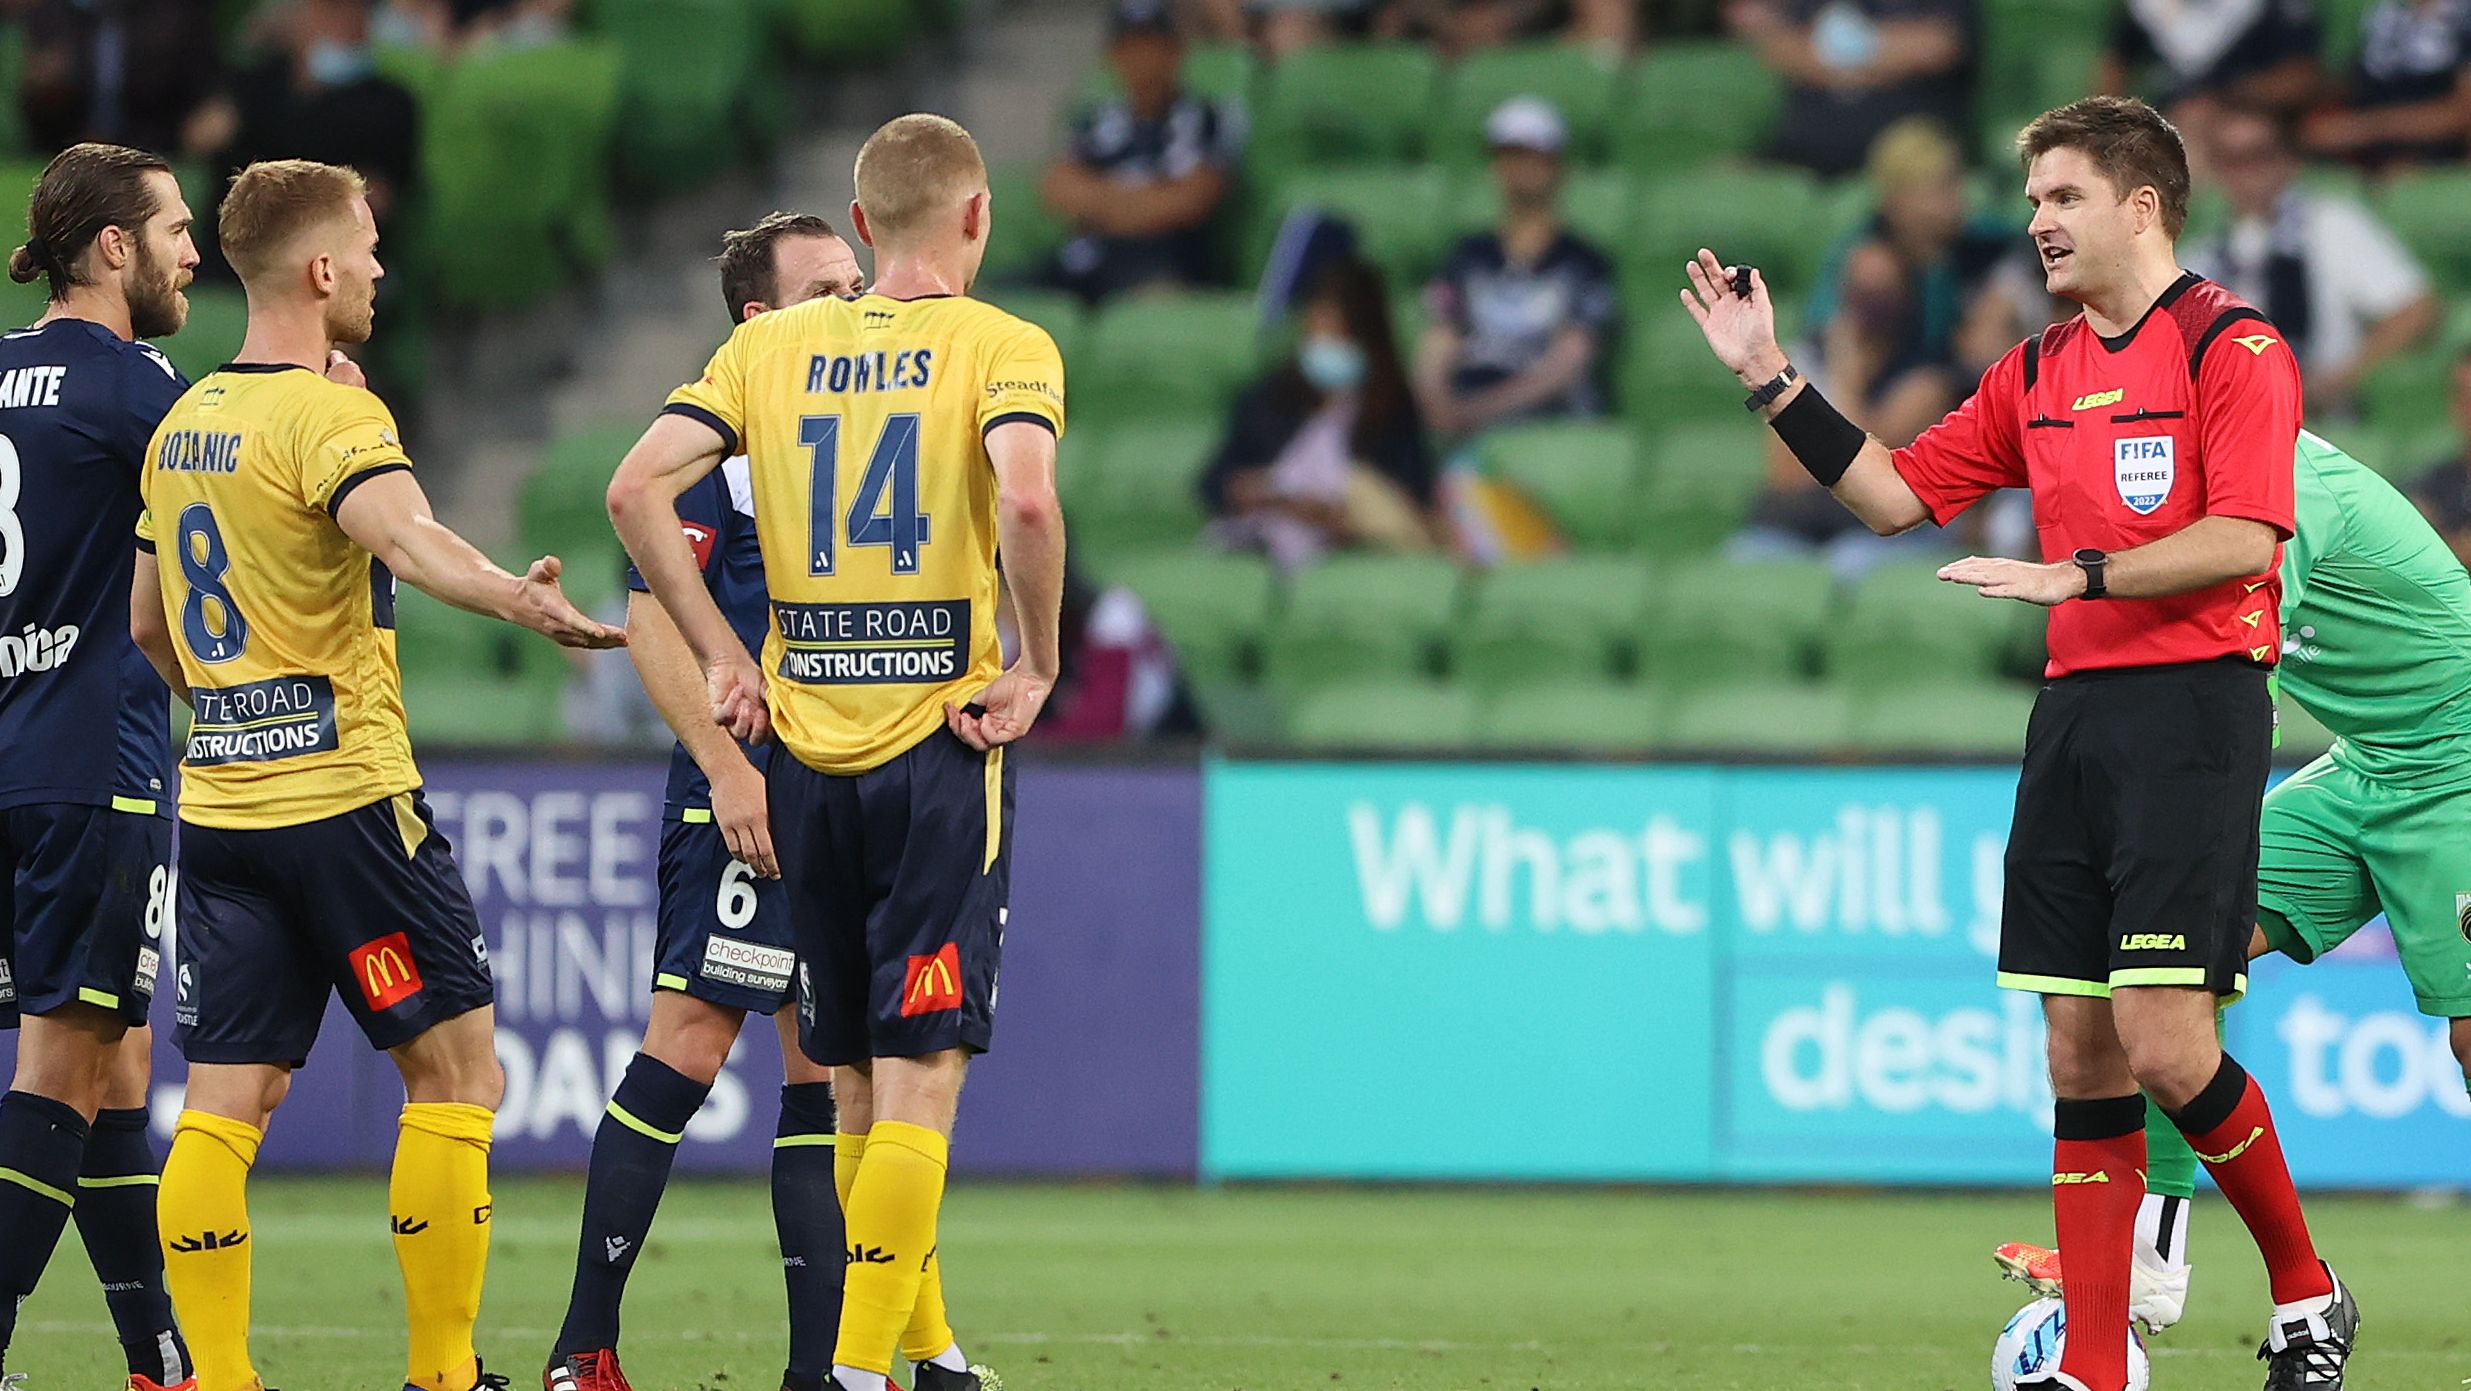 Referee Adam Kersey speaks to players as he awaits a VAR decision during the match between Melbourne Victory and Central Coast Mariners at AAMI Park.